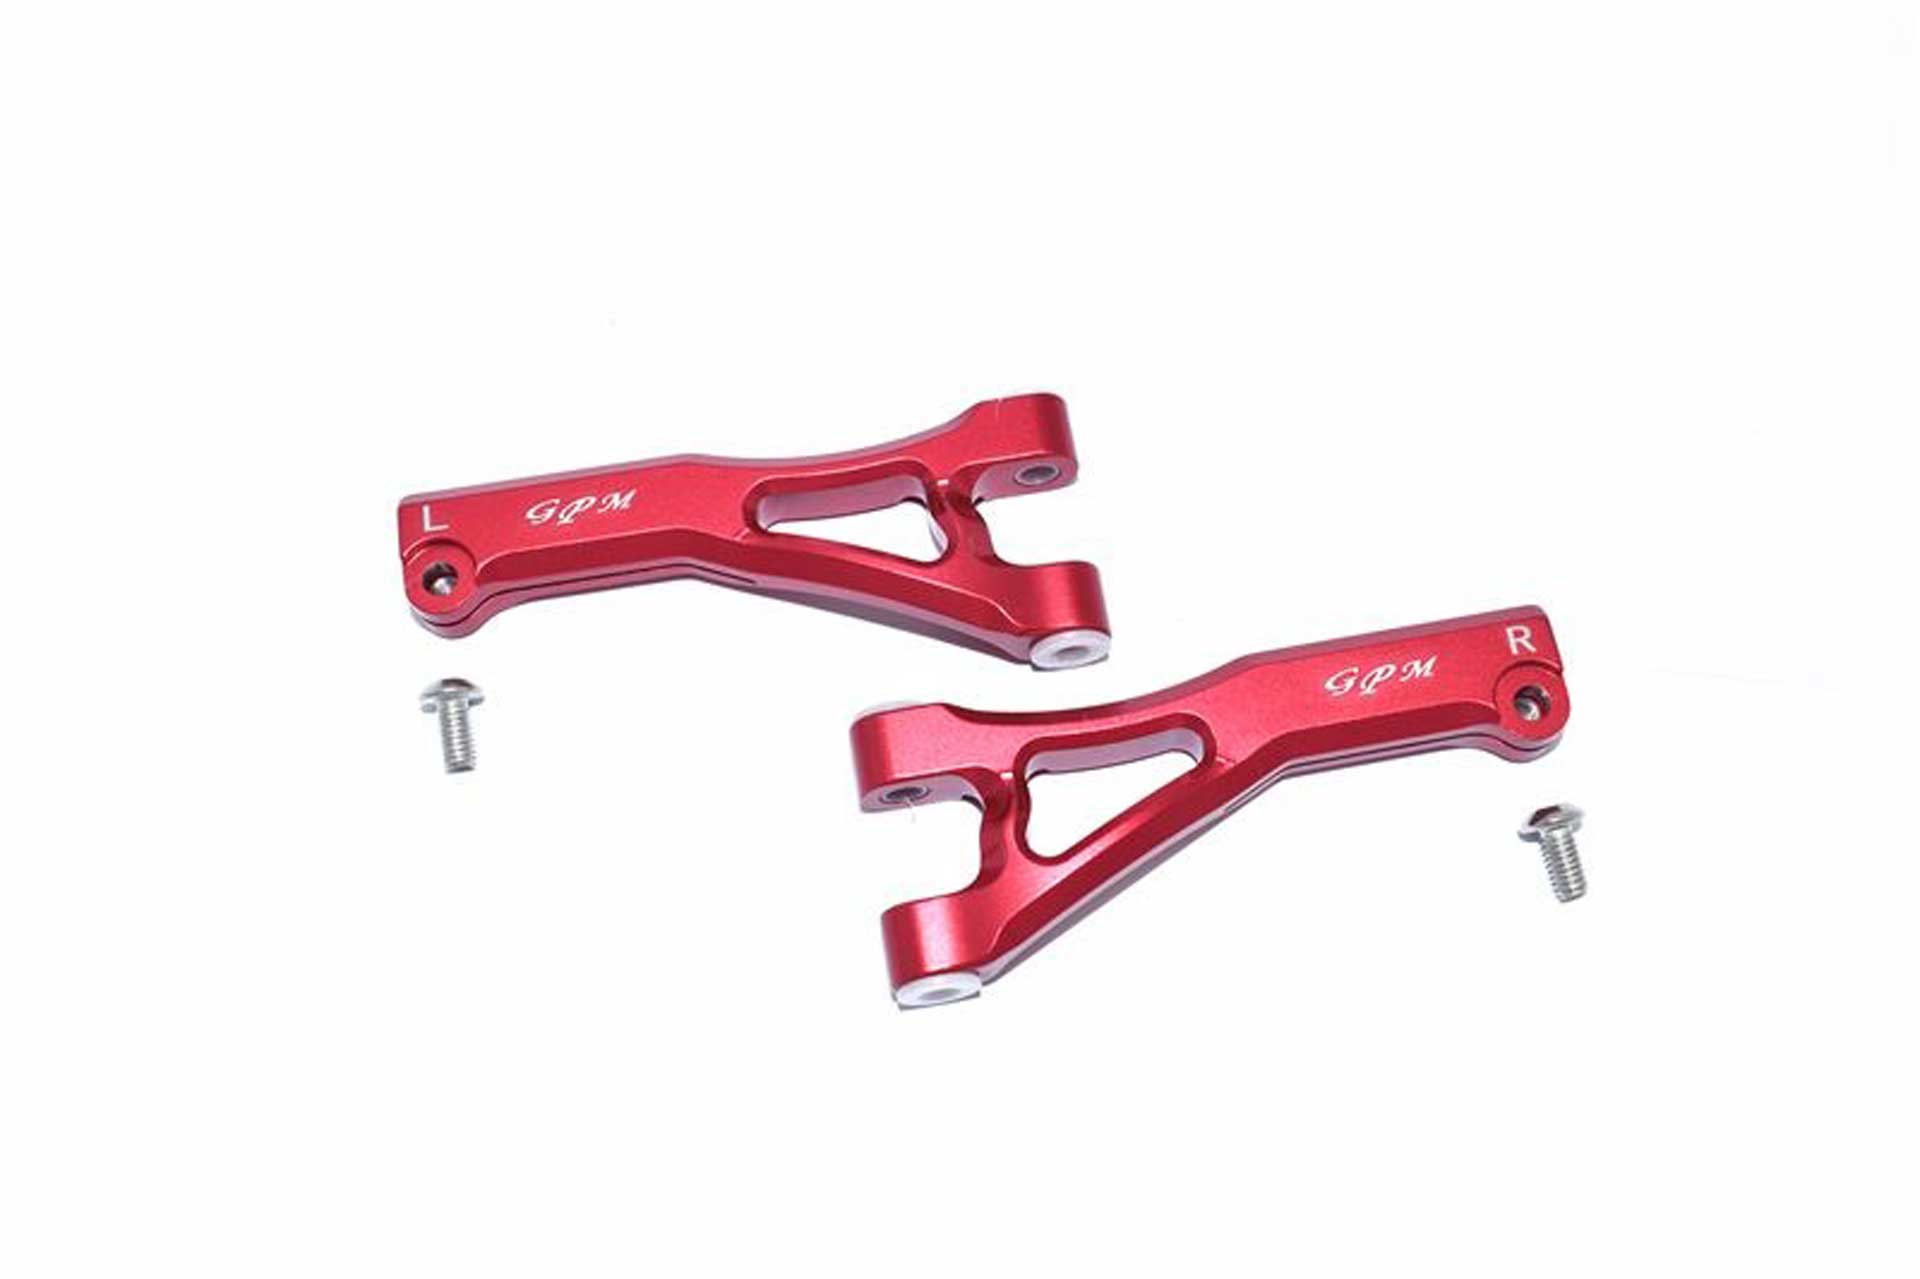 GPM ALUMINUM FRONT UPPER ARMS -4PC SET red GPM ARRMA LIMITLESS INFRACTION TYPHON